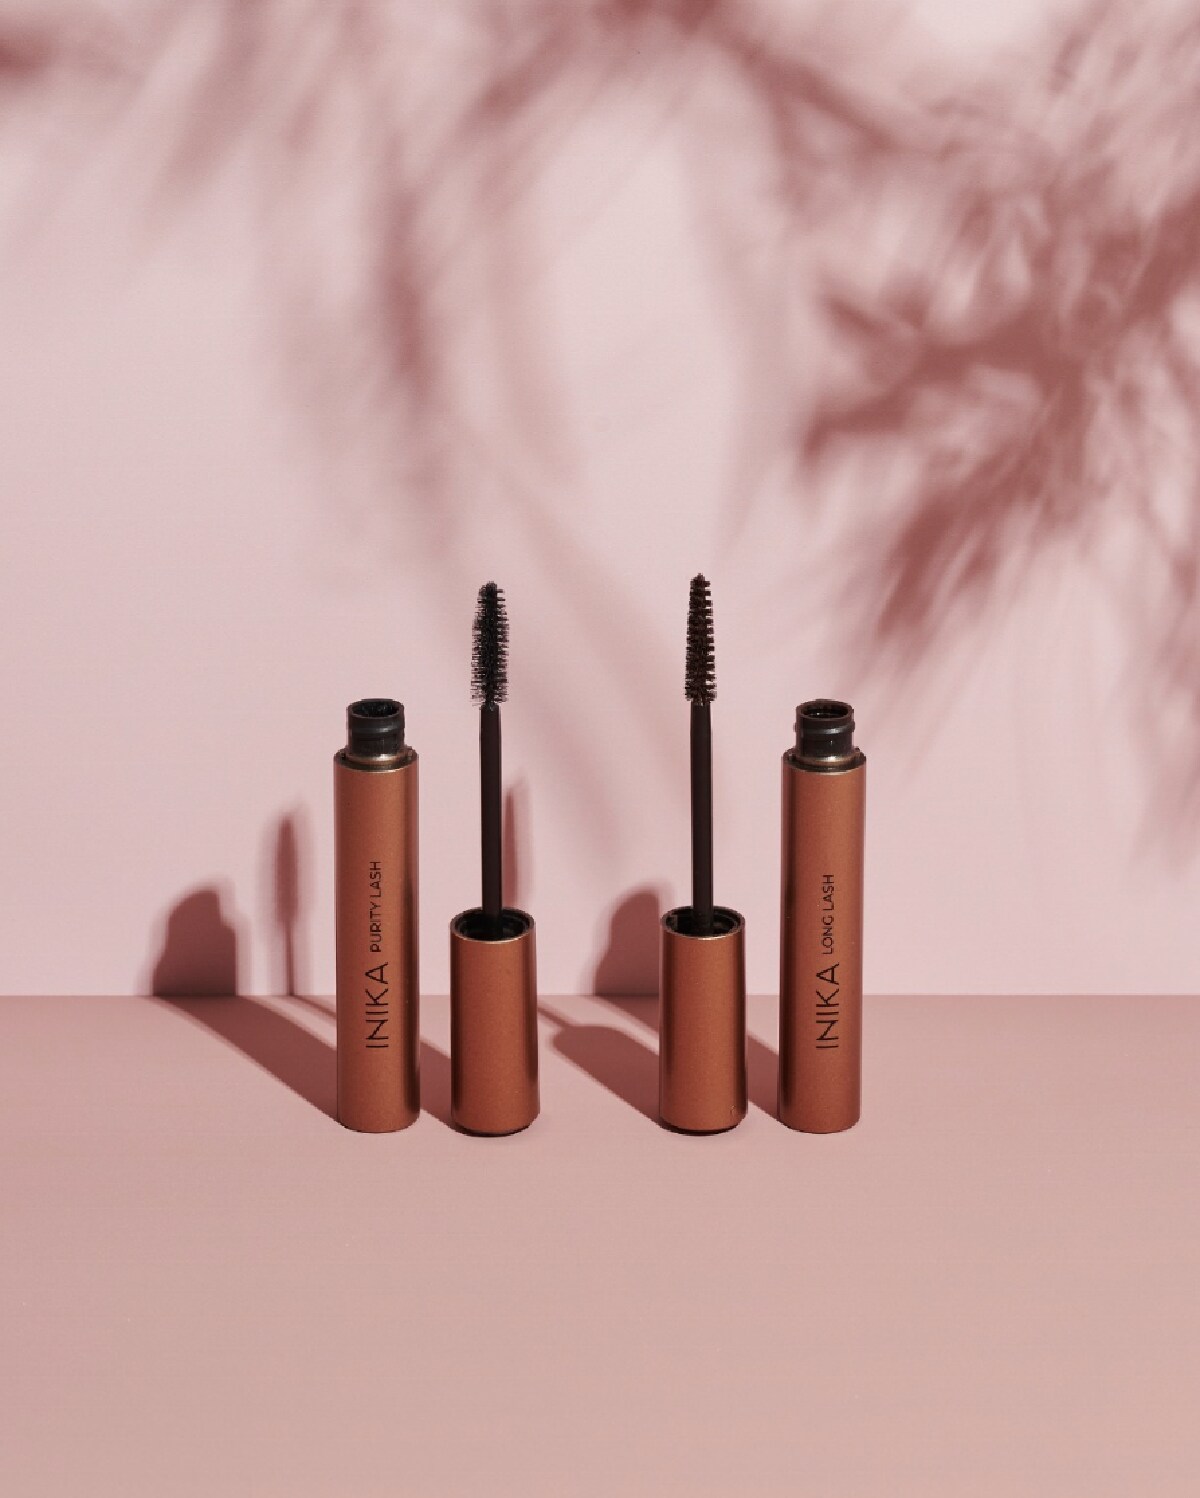 Two copper colored opened tubes of Inika Organics mascara next to black mascara wands against a shadowed pink backround. 